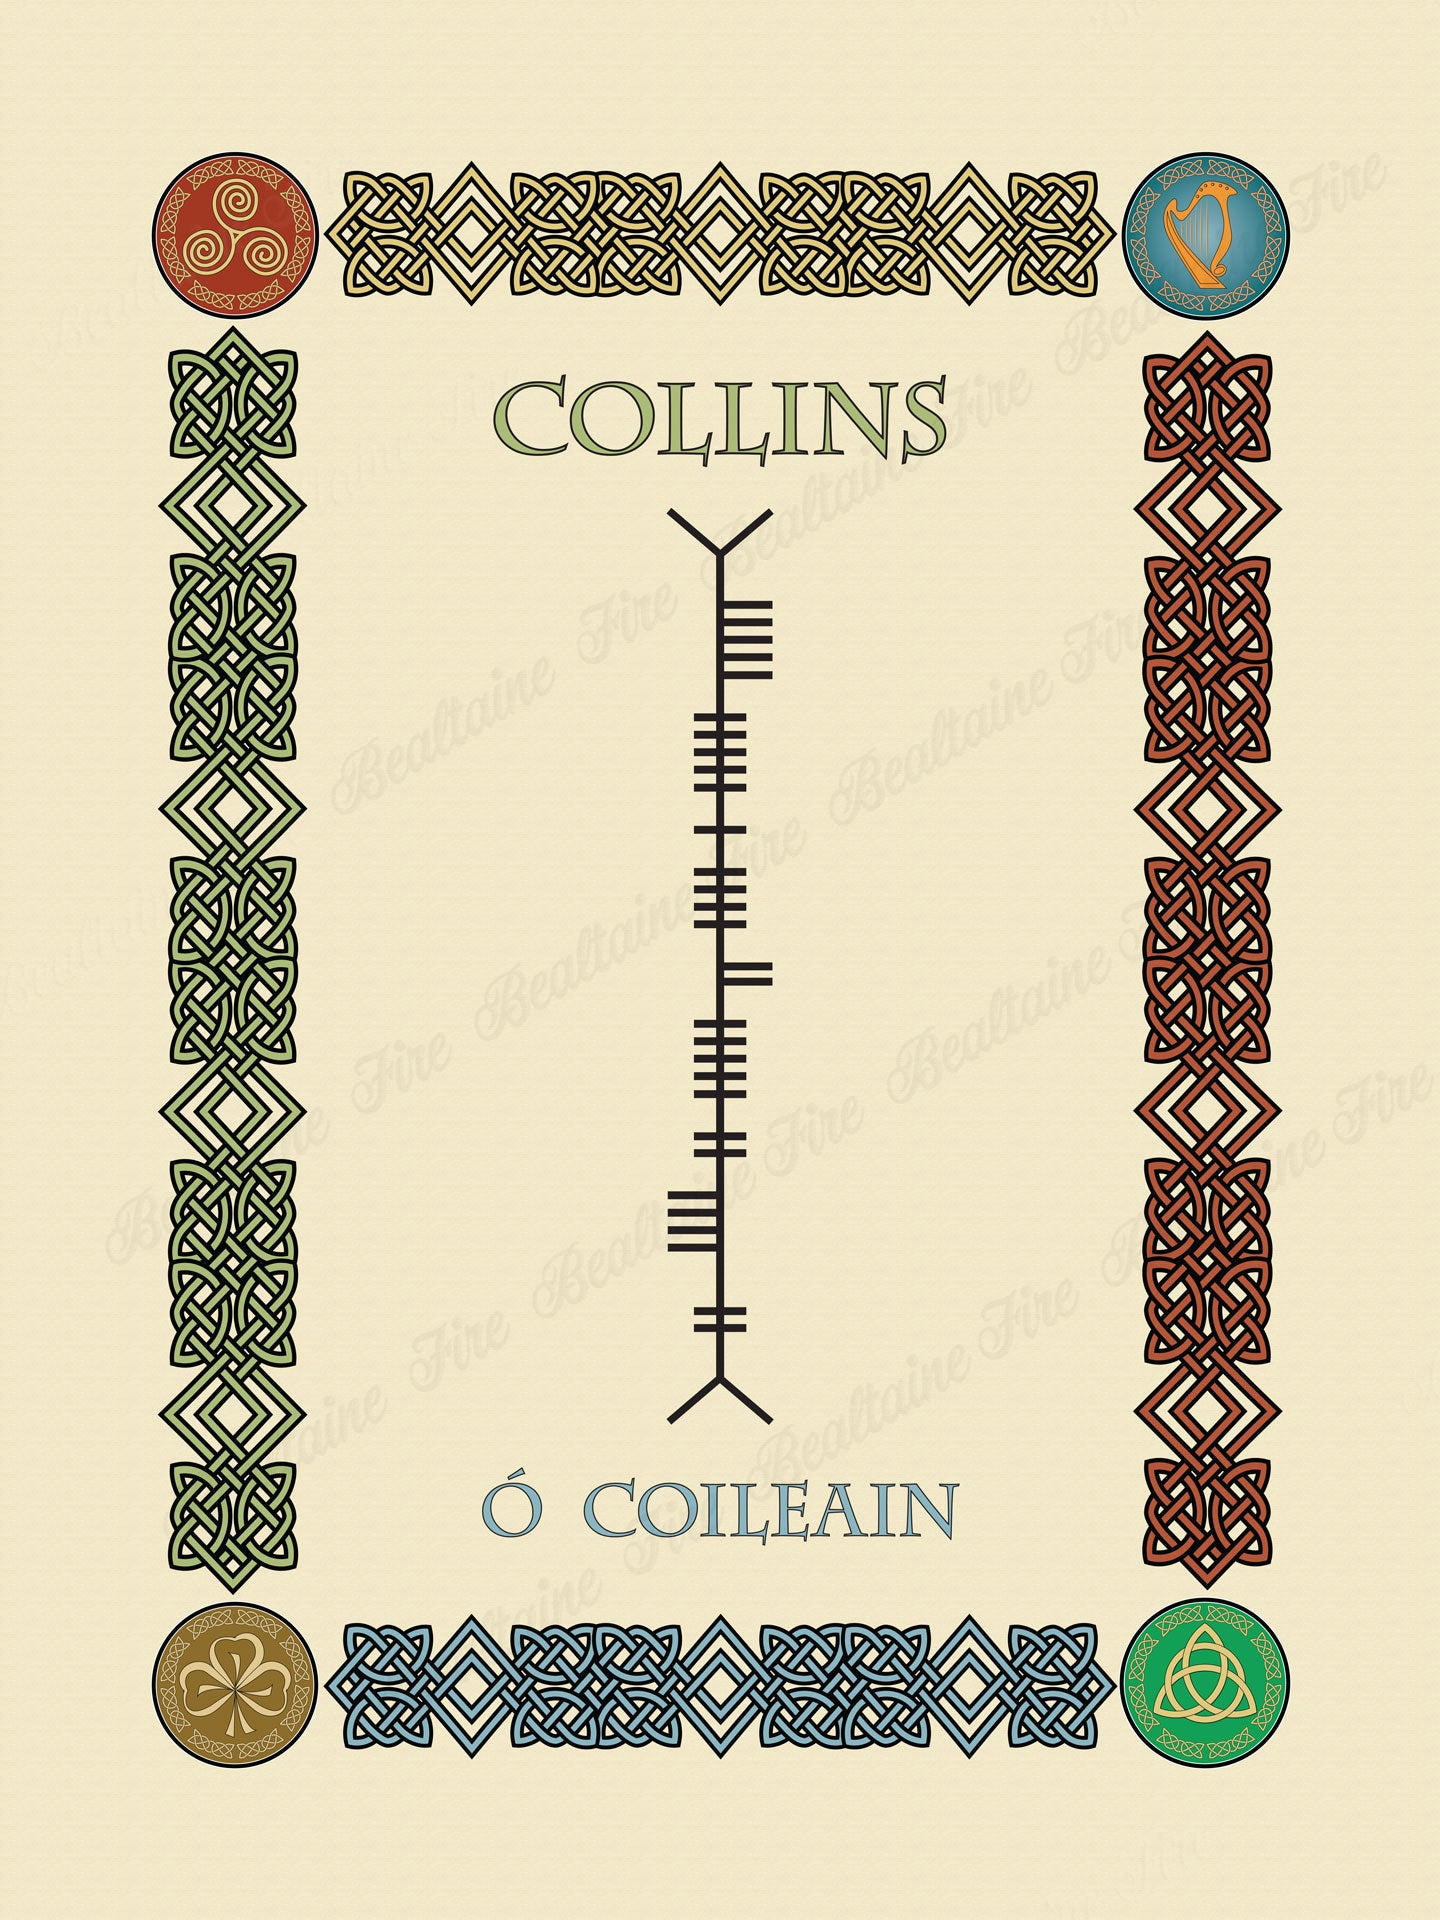 Collins in Old Irish and Ogham - PDF Download